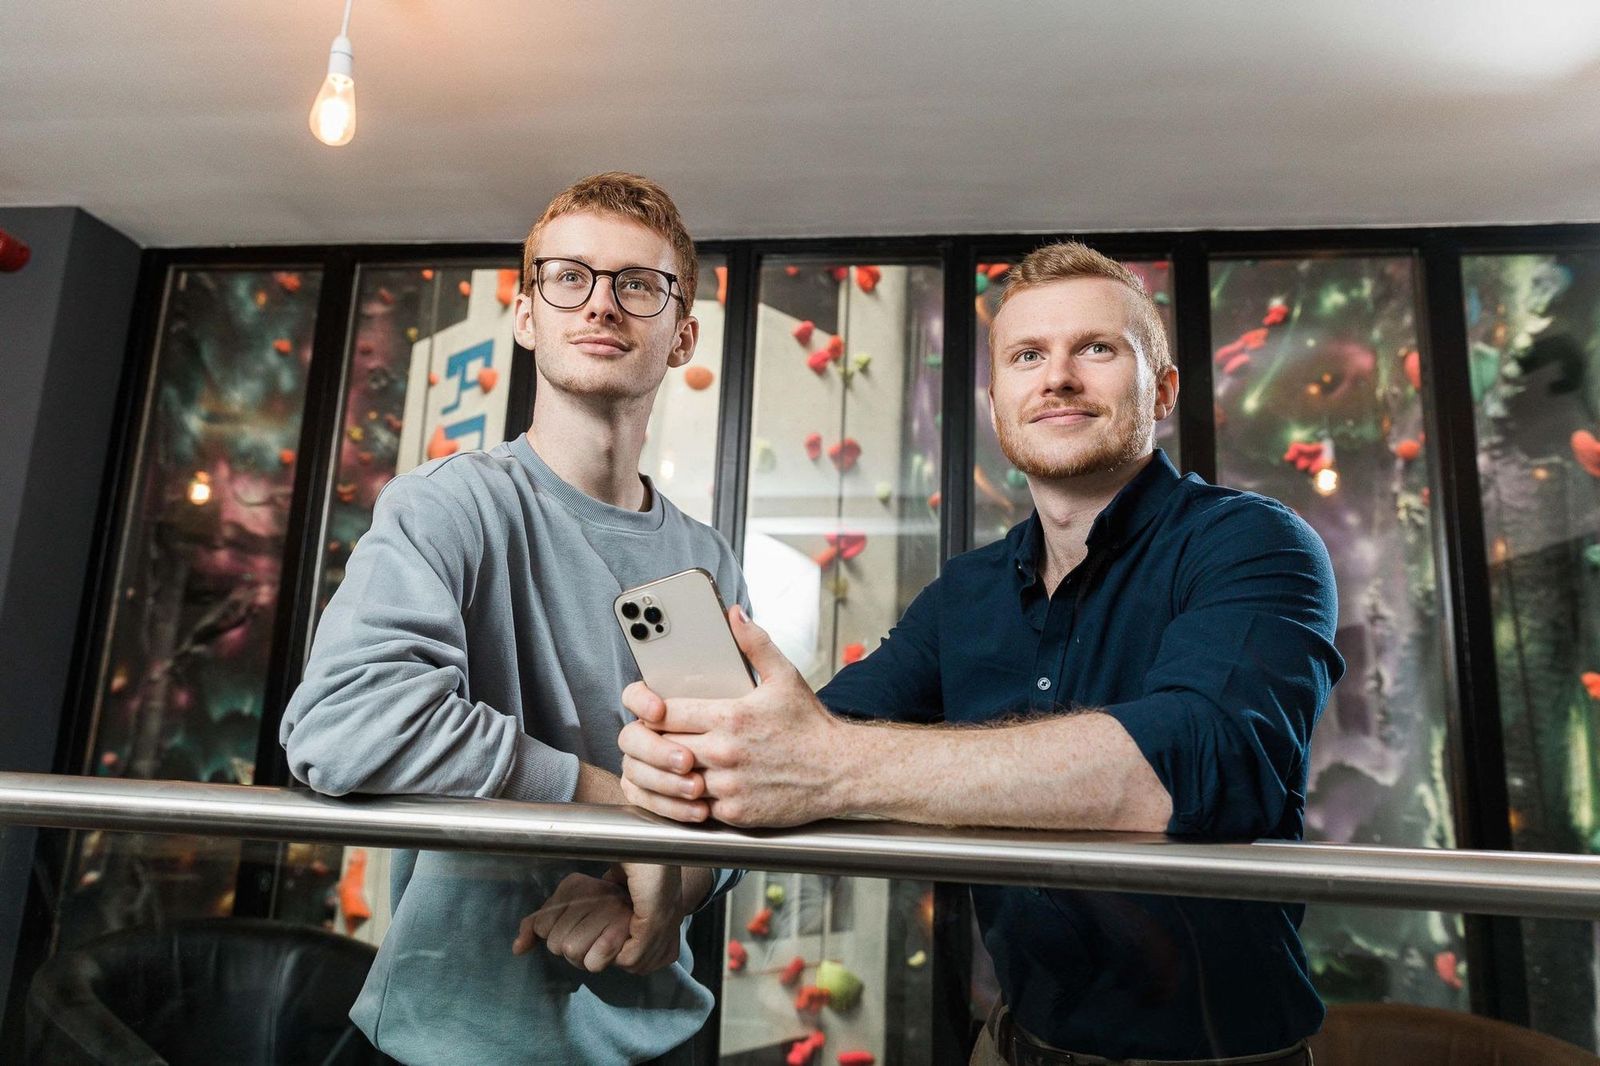 Hull no-code app developer focused on R&D and growth